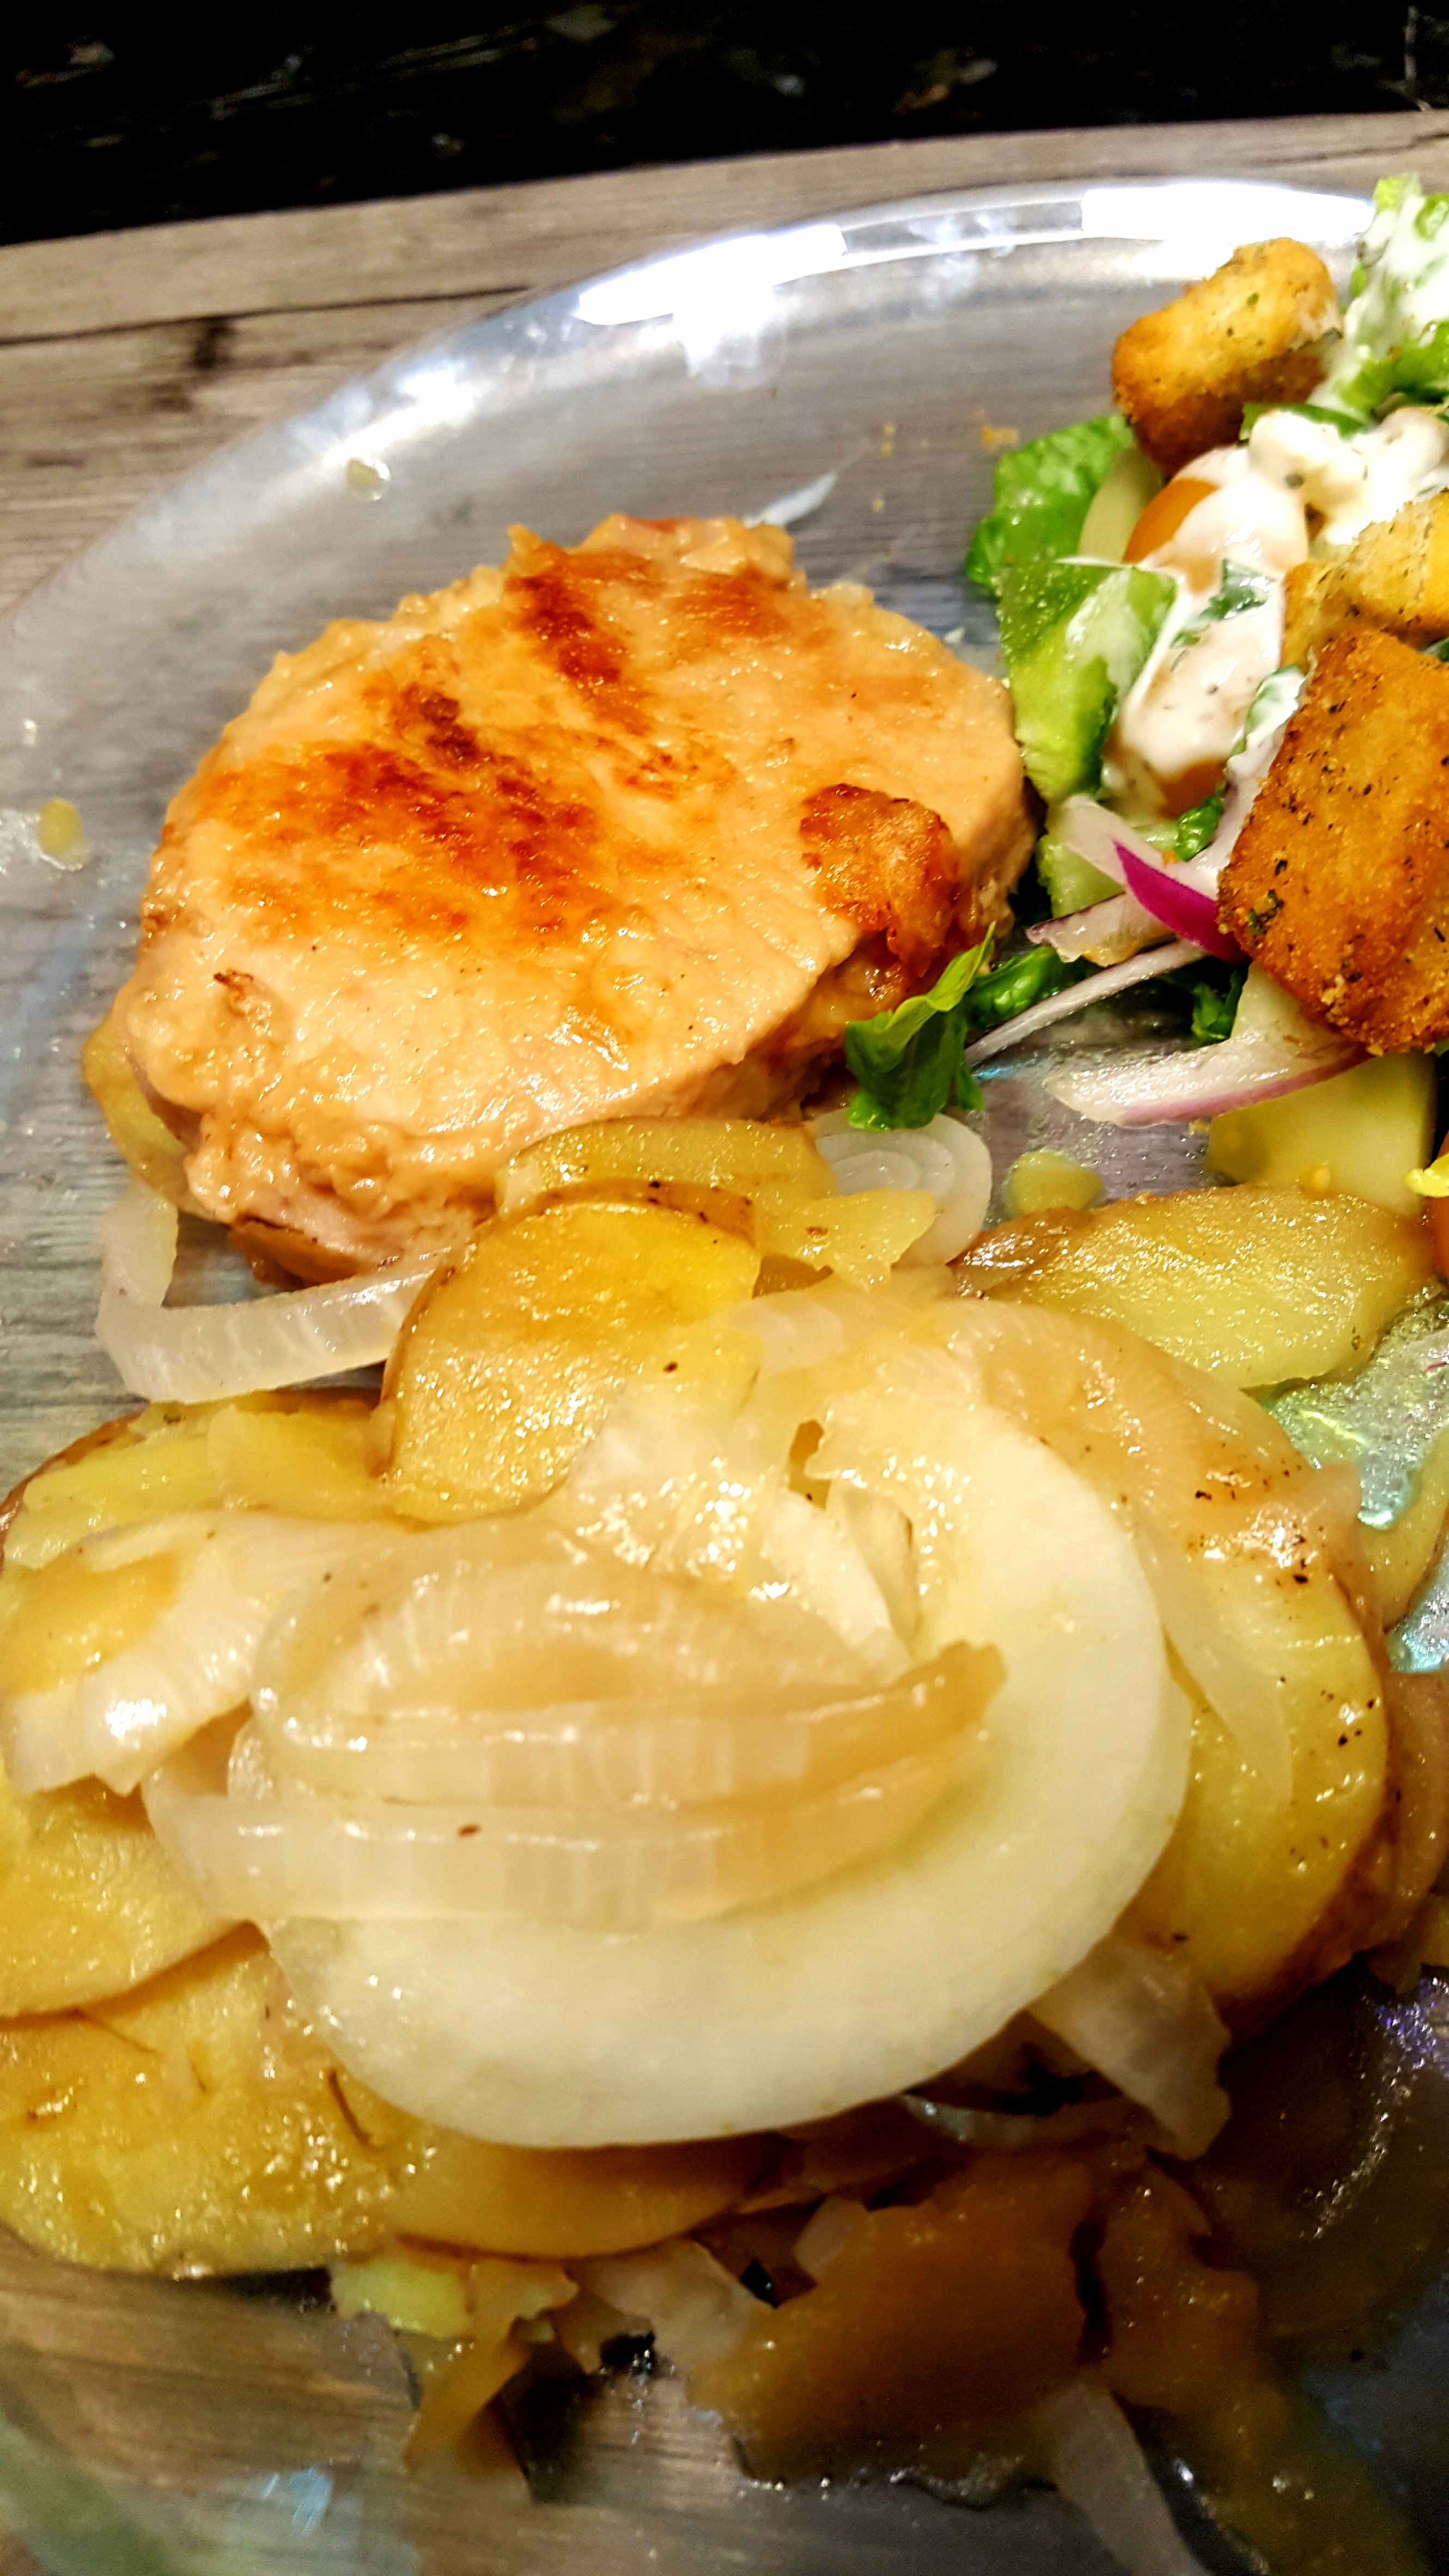 Skillet Pork Chops with Potatoes and Onion